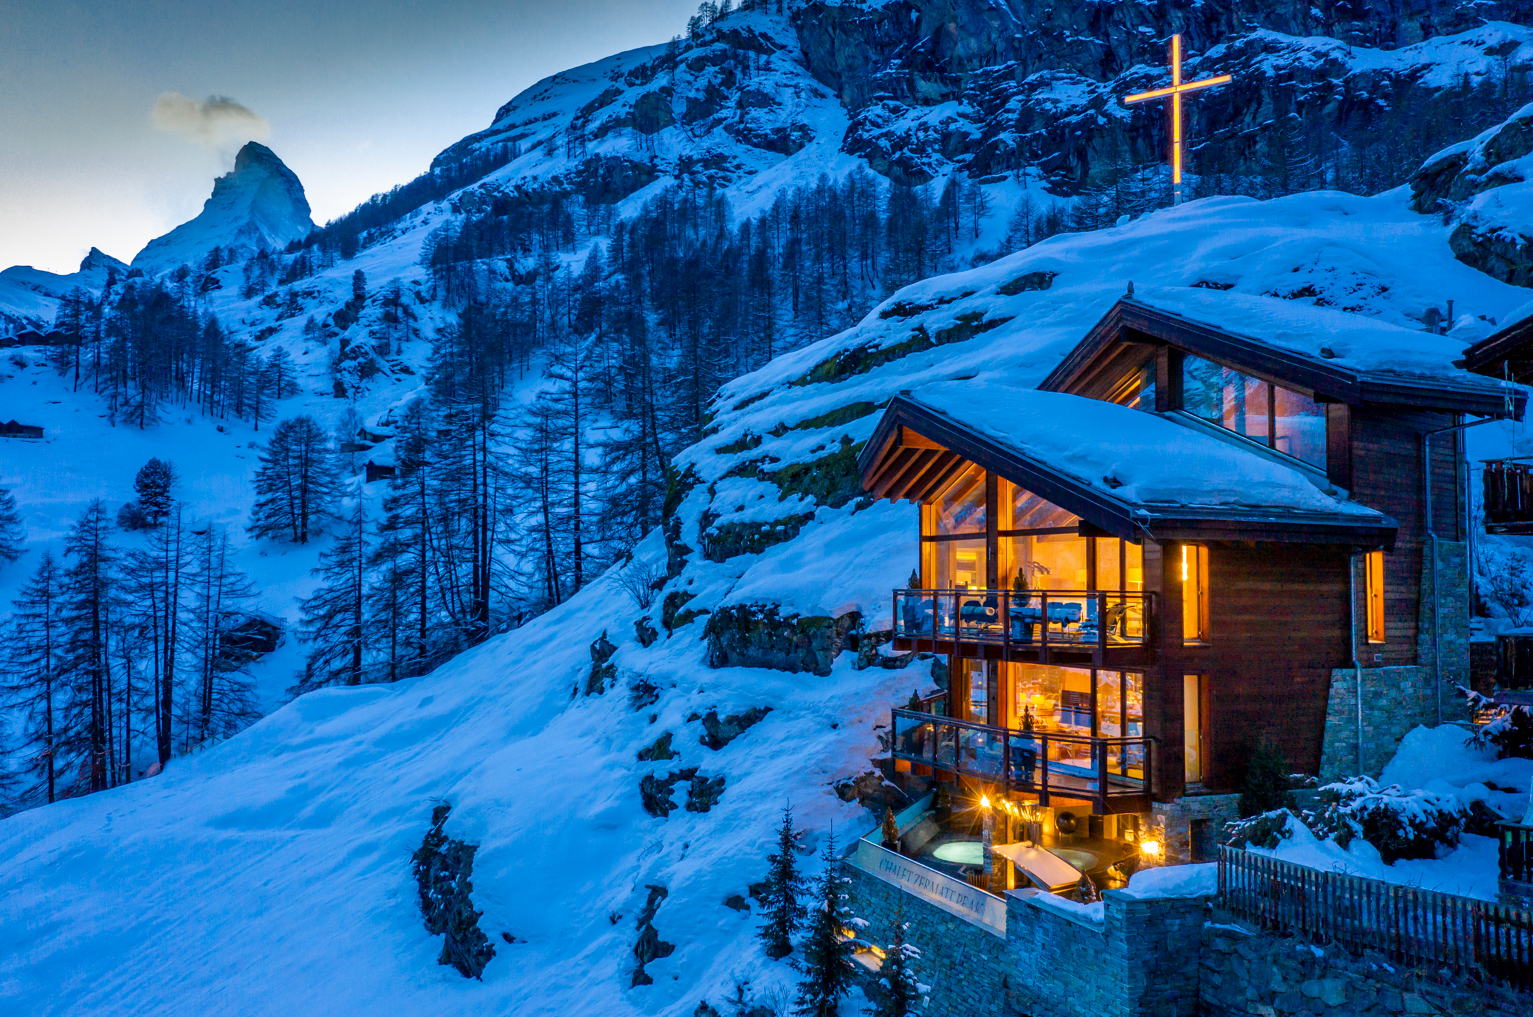 Illuminated chalet in snowy mountains at dusk, with a lit cross on the hillside